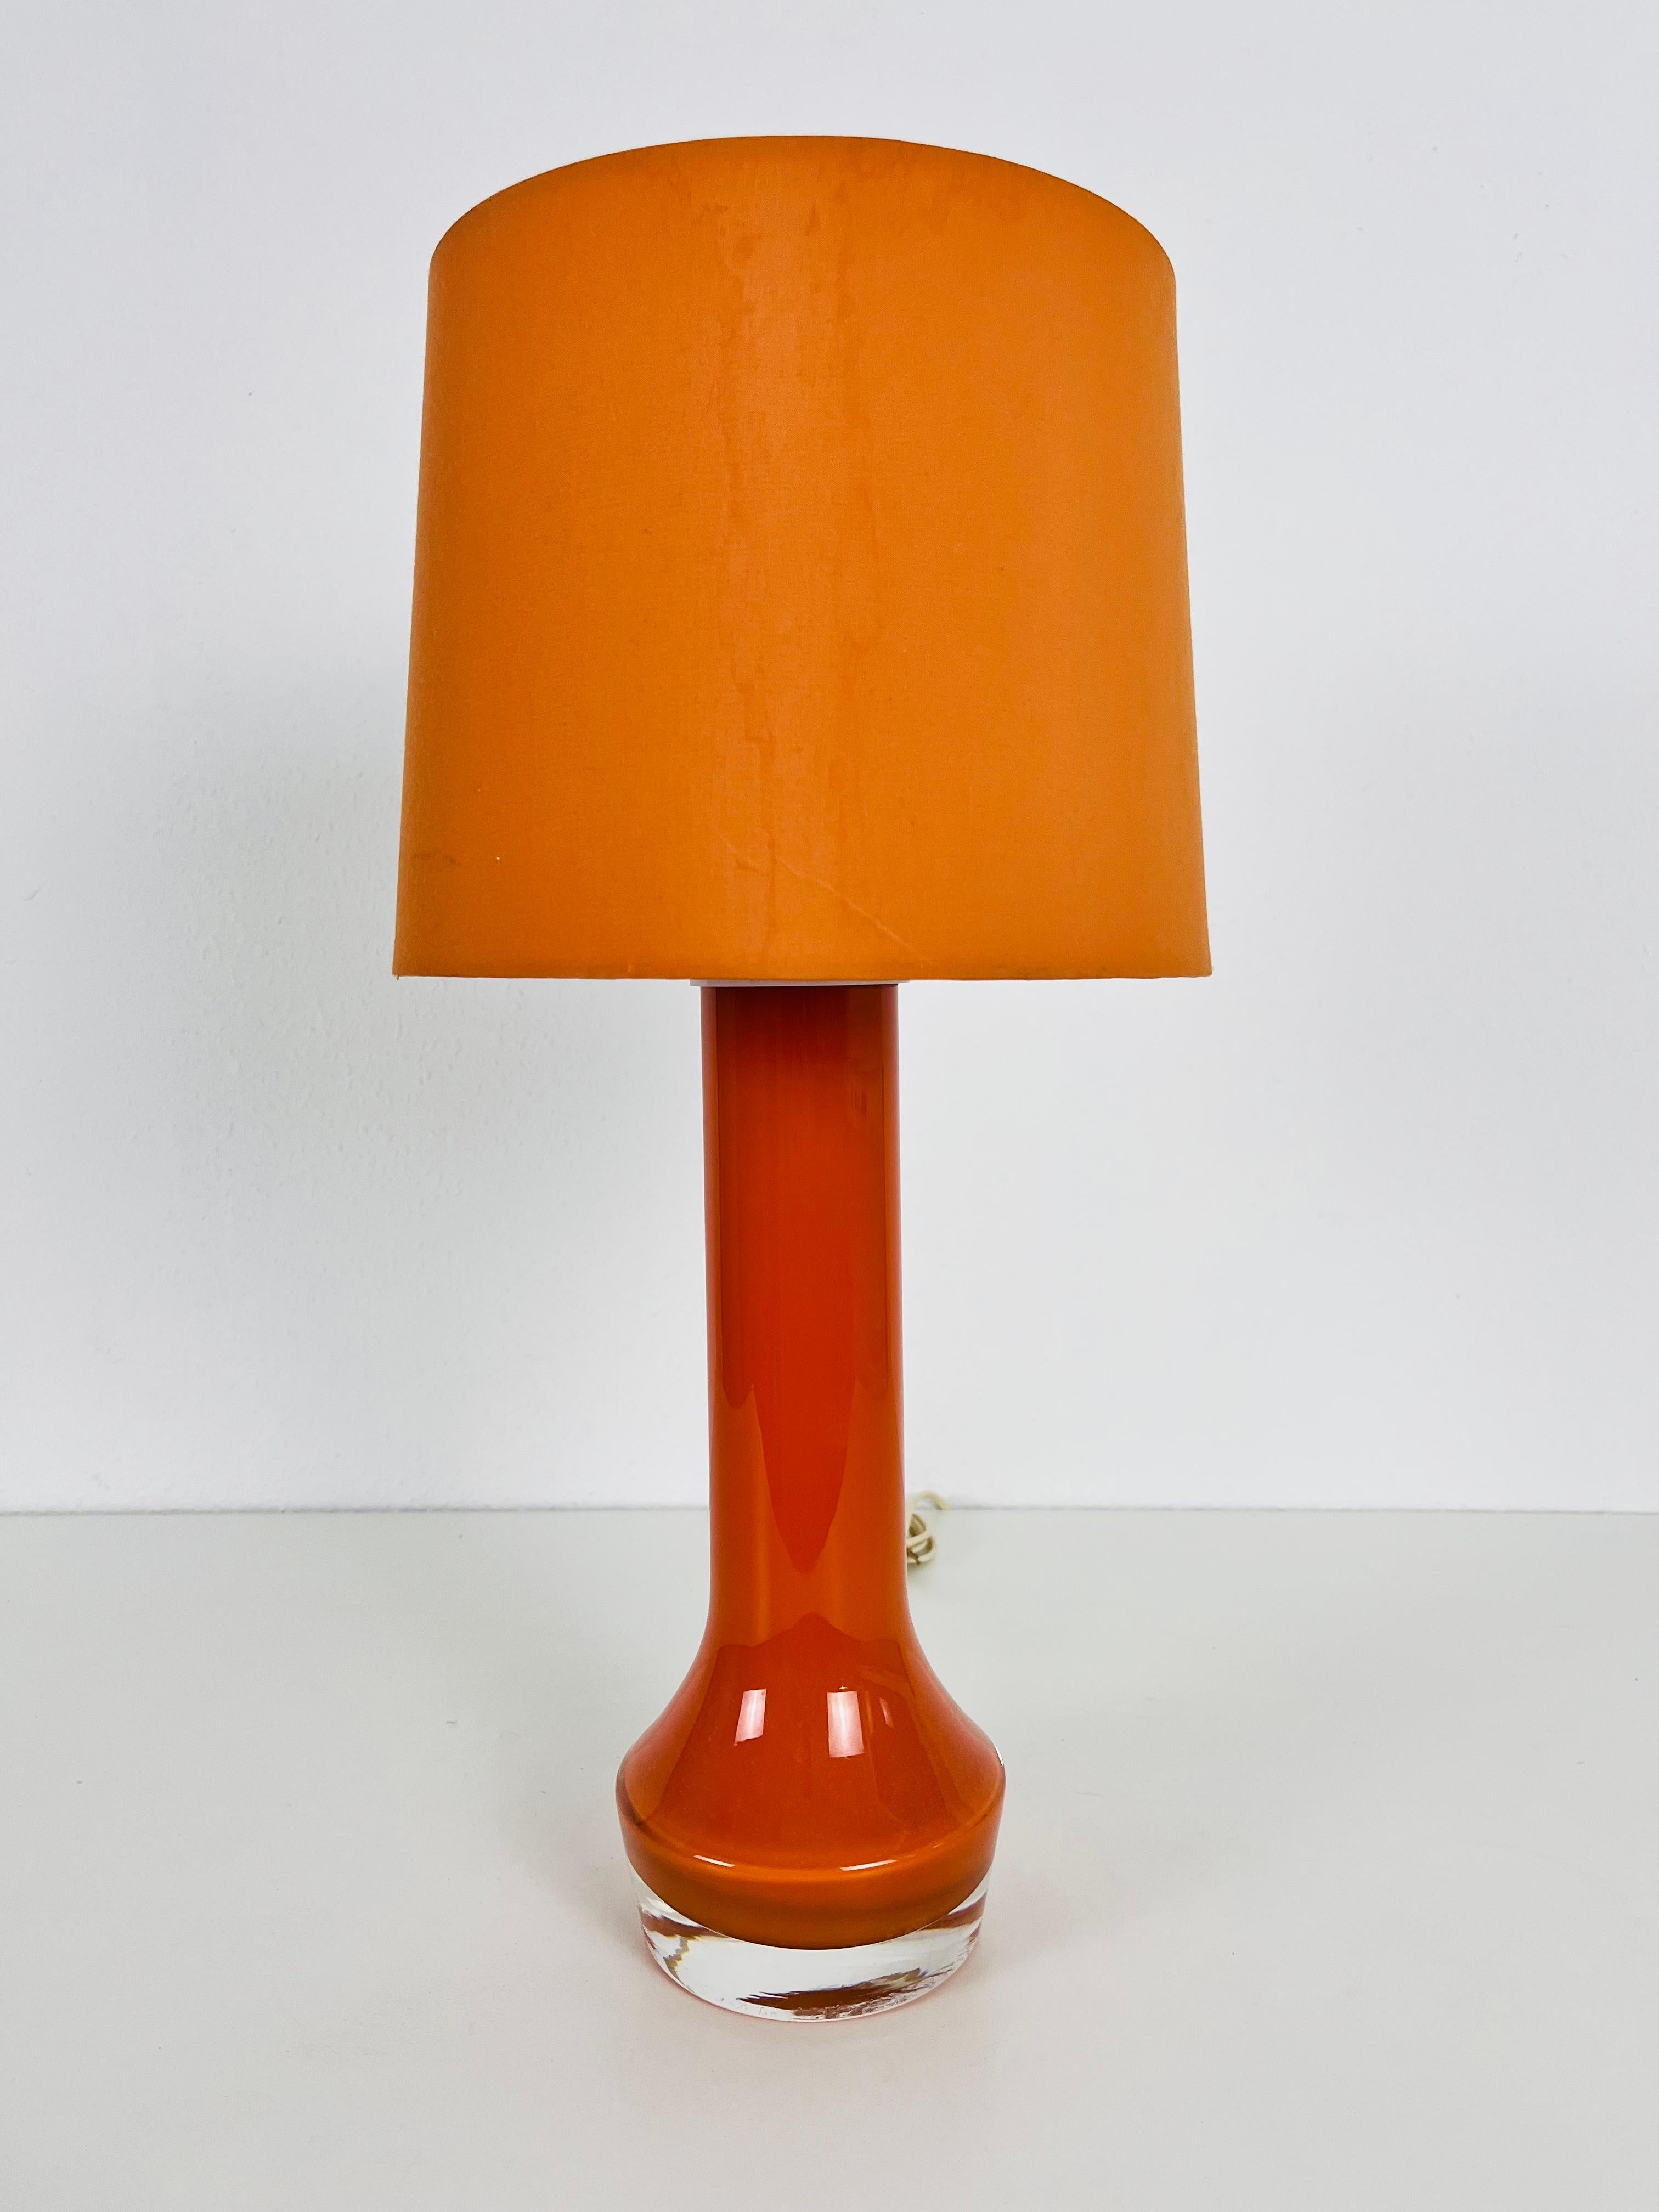 A beautiful large table lamp made in the 1960s. The base is made of heavy orange colored glass. The lamp shade is made of fabric and has a dark orange color.

The light requires one E27 light bulb. Works with both 120/220 V. Good vintage